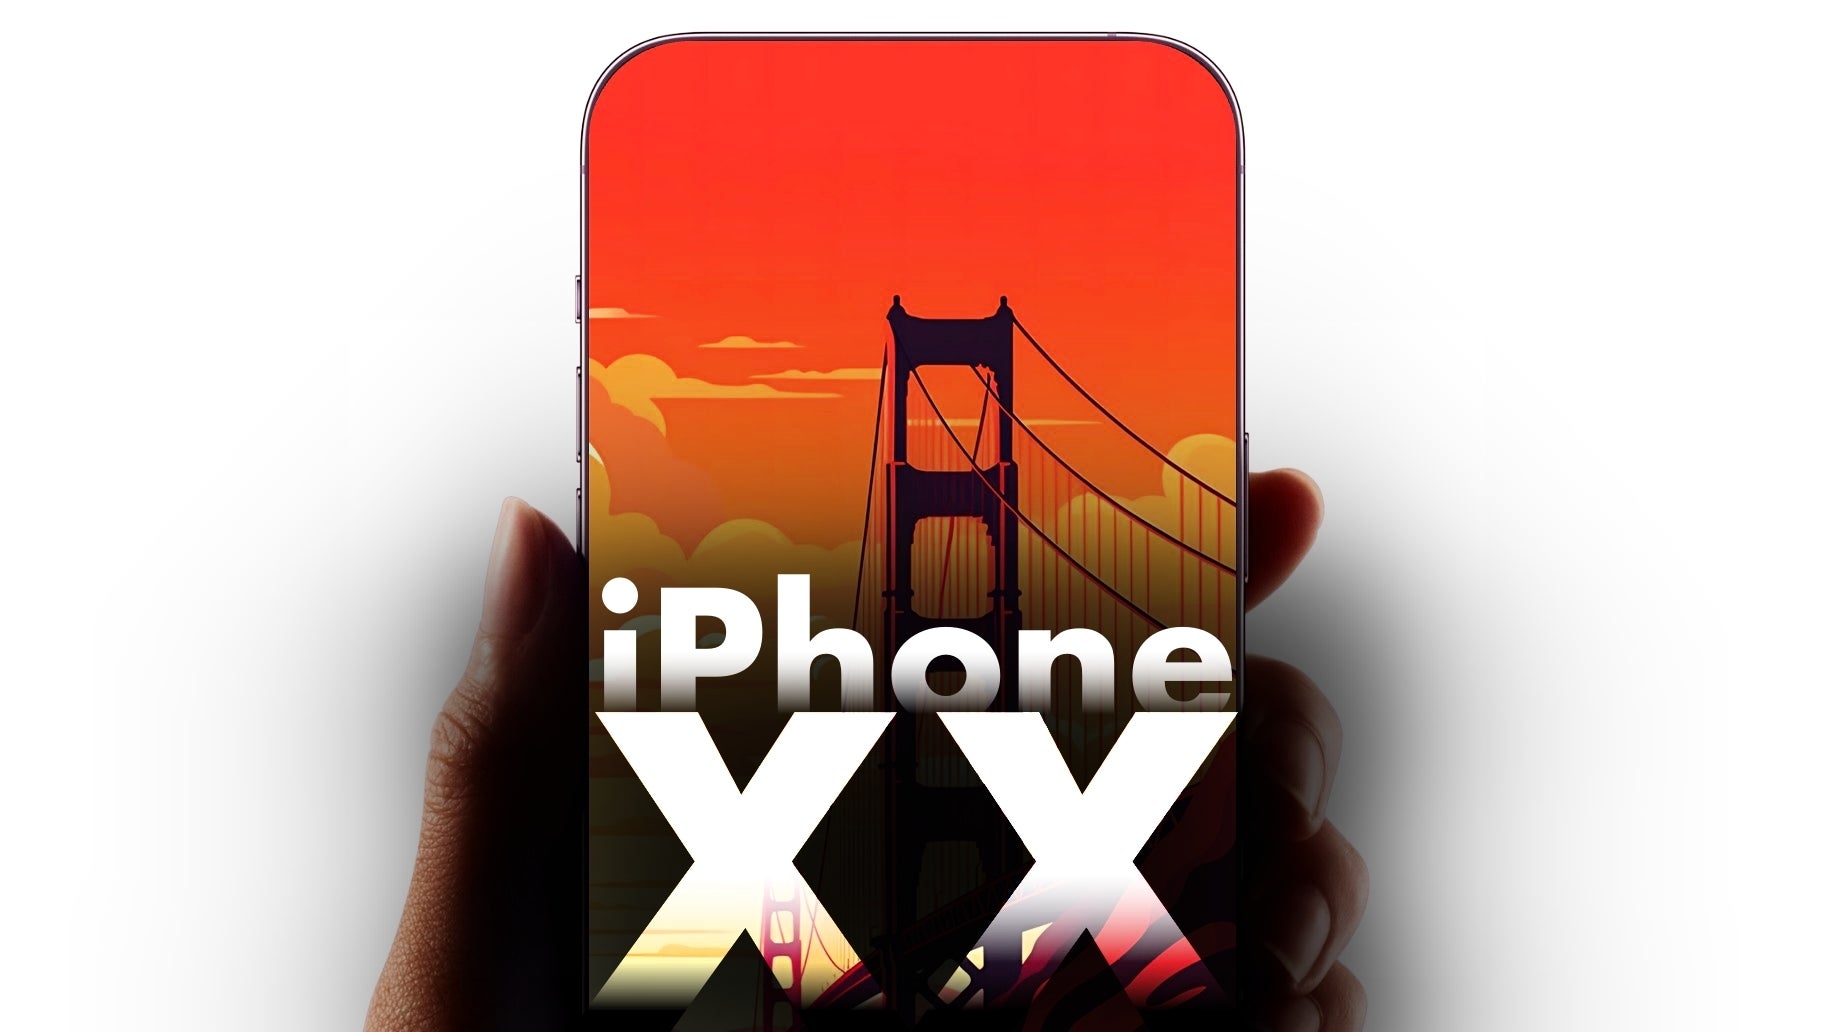 Apple&#039;s iPhone XX plan: Unbreakable, all-screen glass box iPhone and Tim Cook&#039;s One Last Thing?